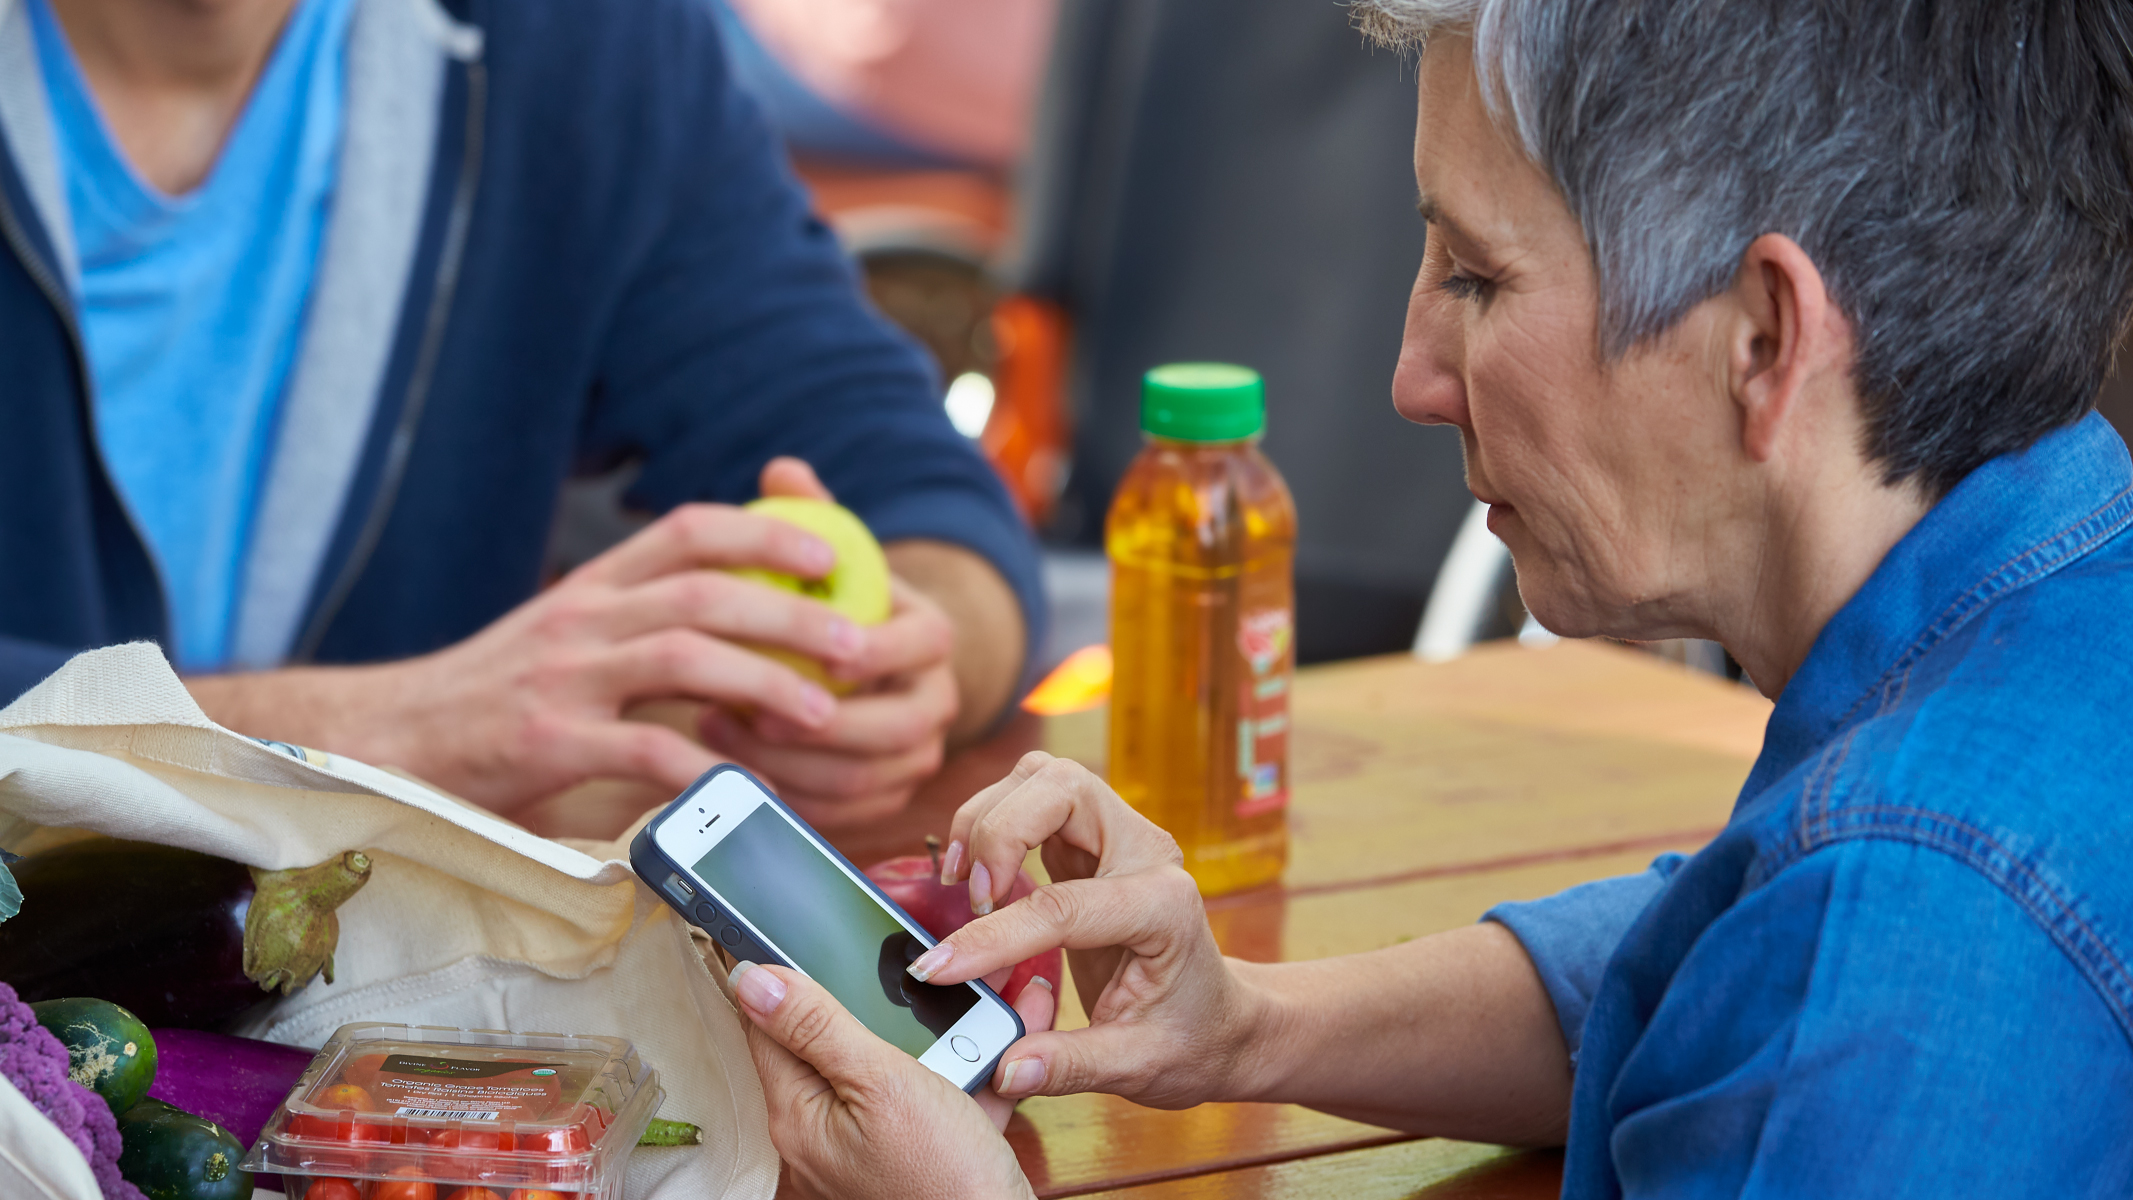 An adult scrolling on their phone while sitting at a picnic table with another person. A bag of fresh vegetables is on the table.